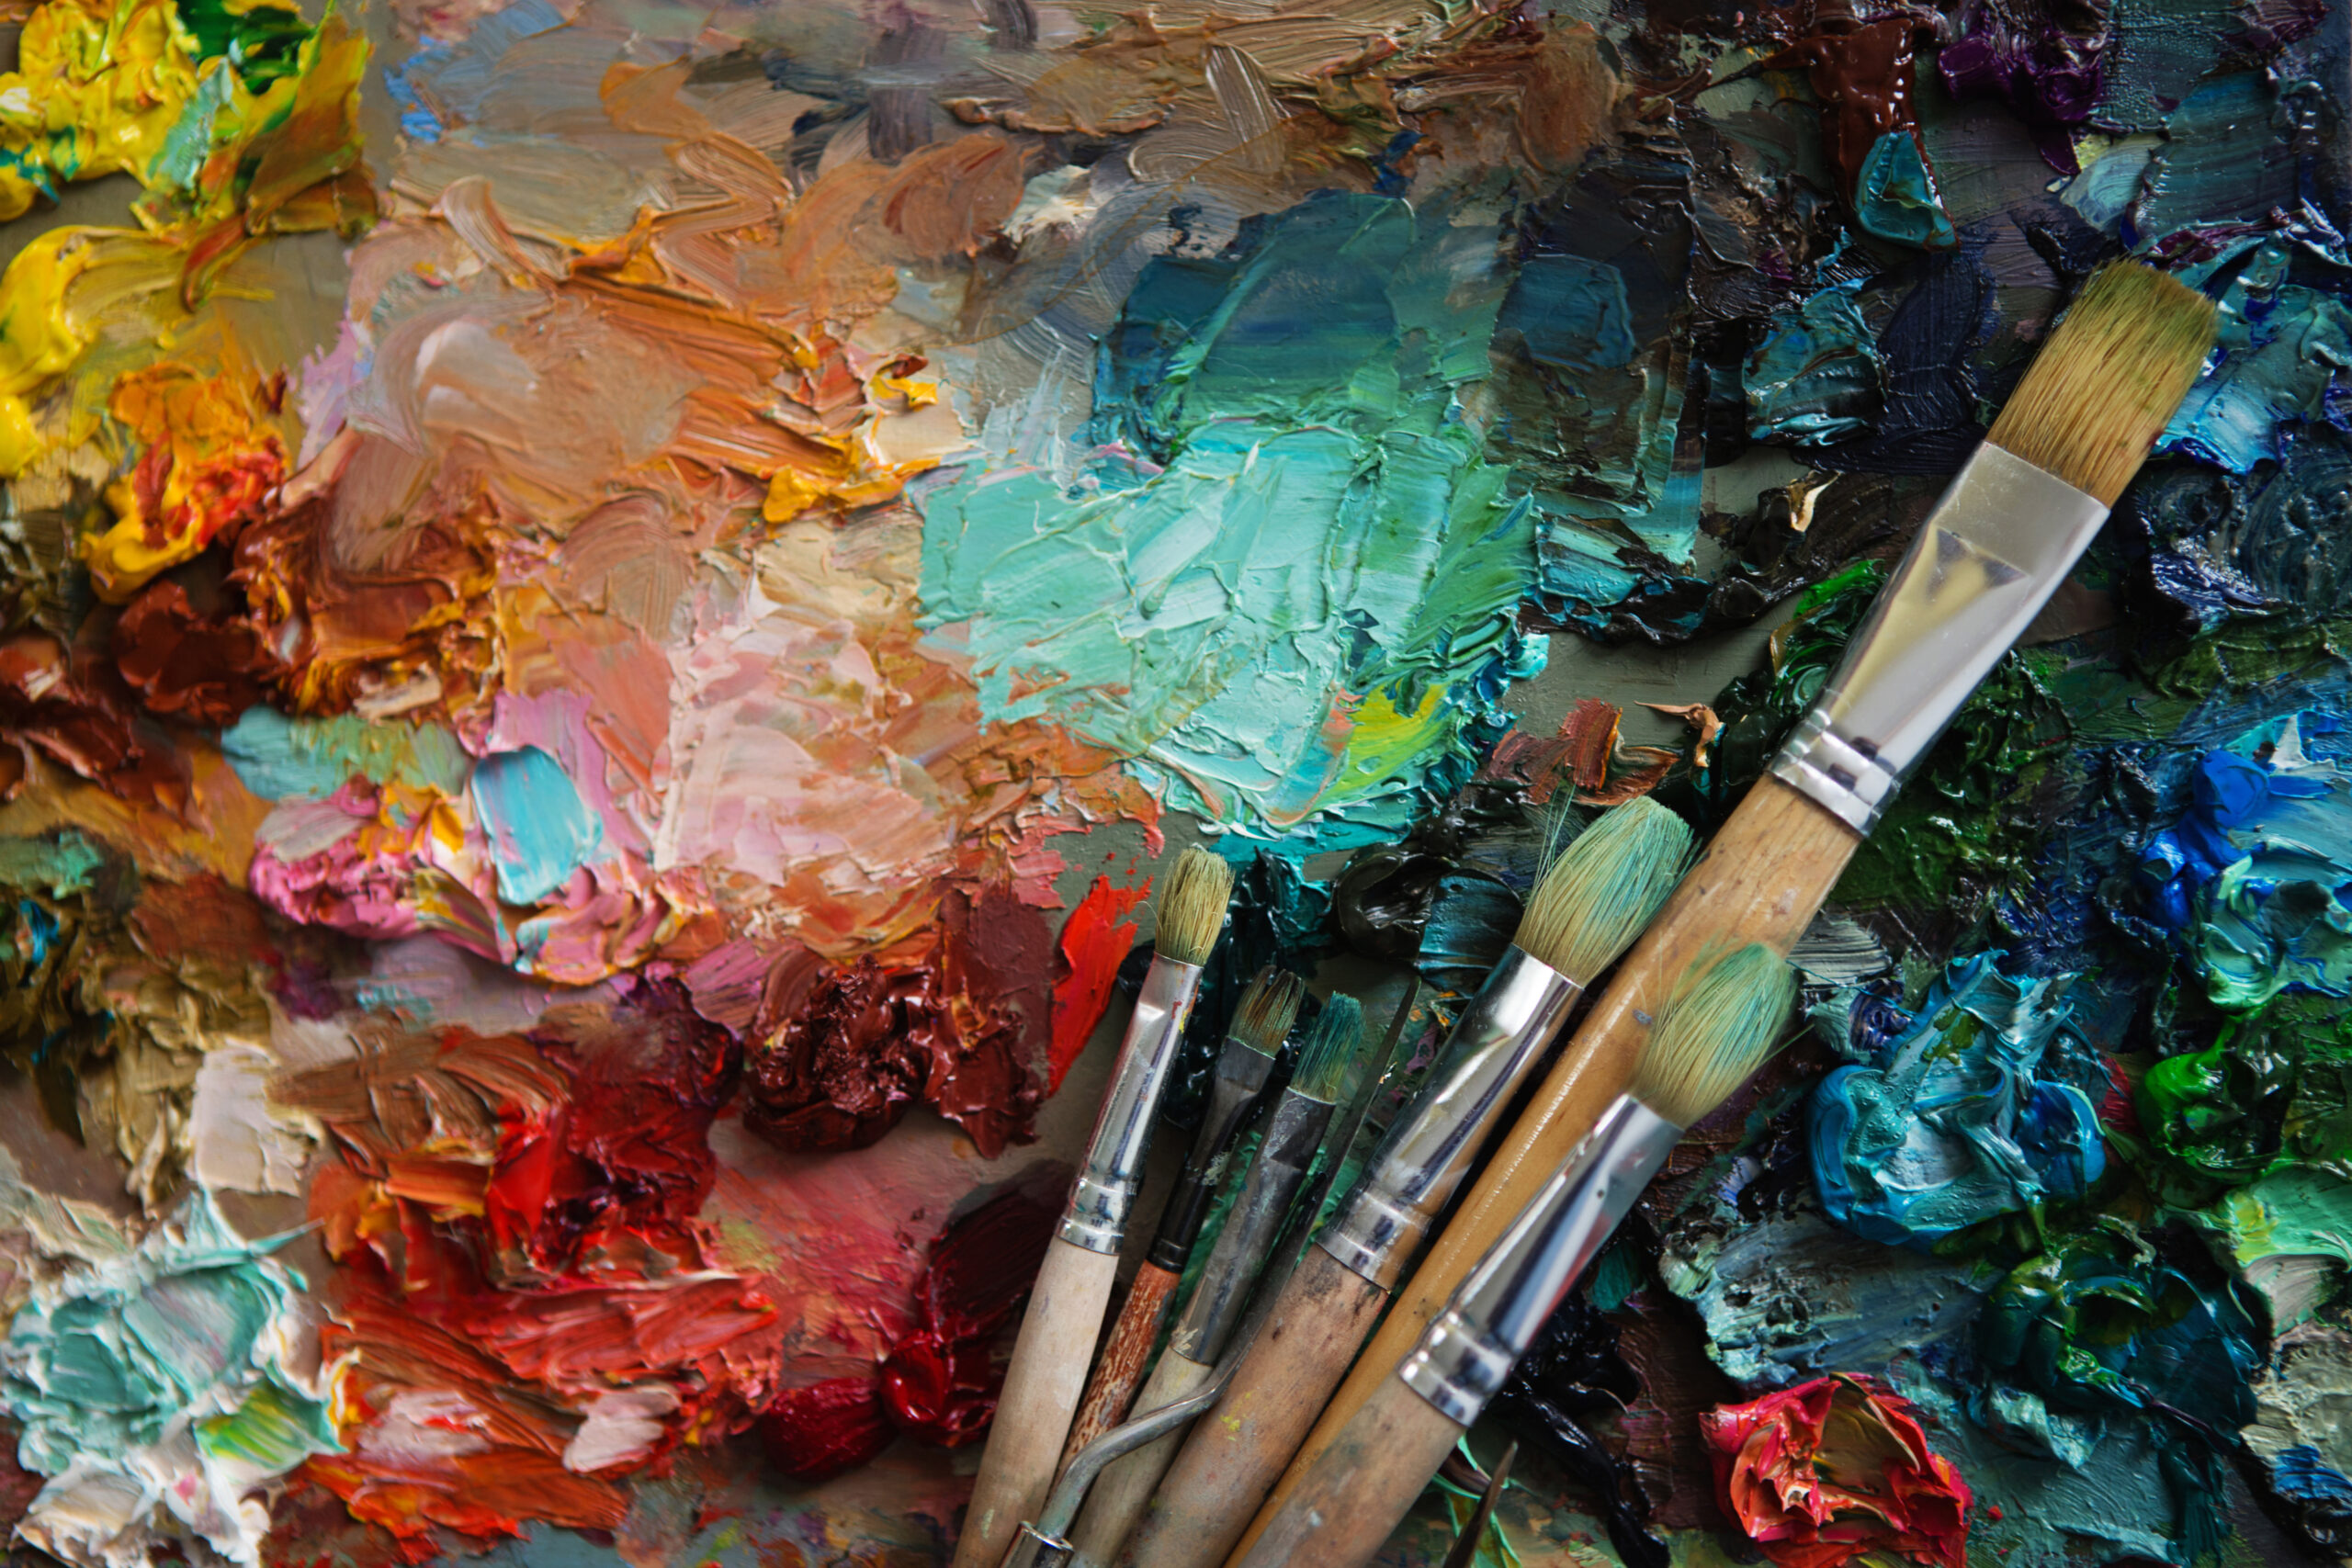 A set of paintbrushes are pictured resting on an art canvas where many different paint colours have been used.